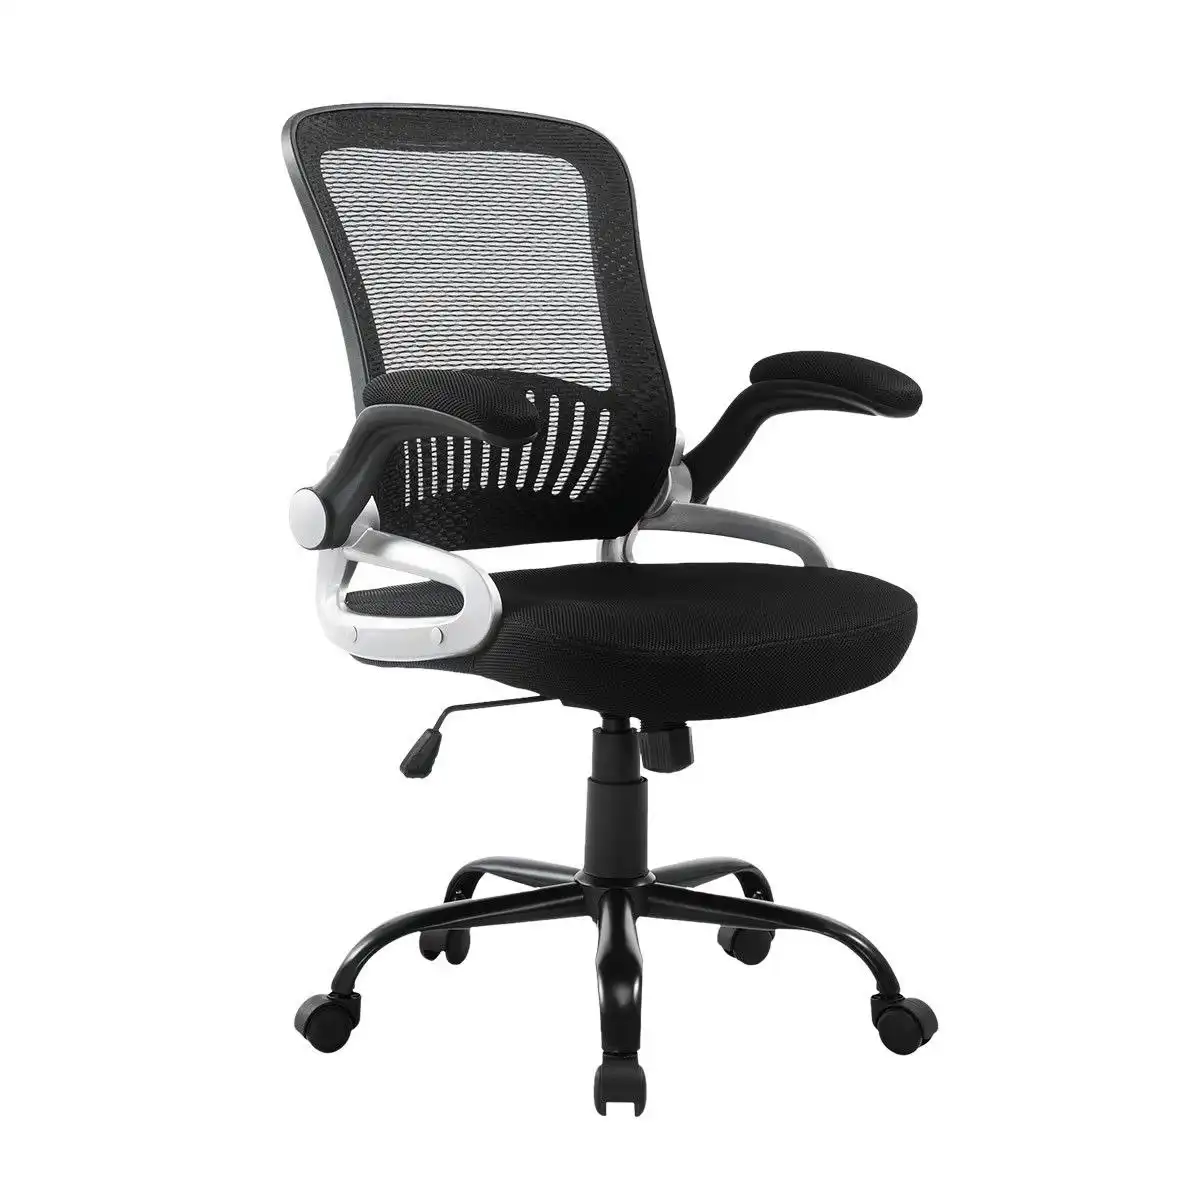 Ausway Ergonomic Mesh Office Chair Lumbar Support Adjustable Armrest Height Back Angle Black